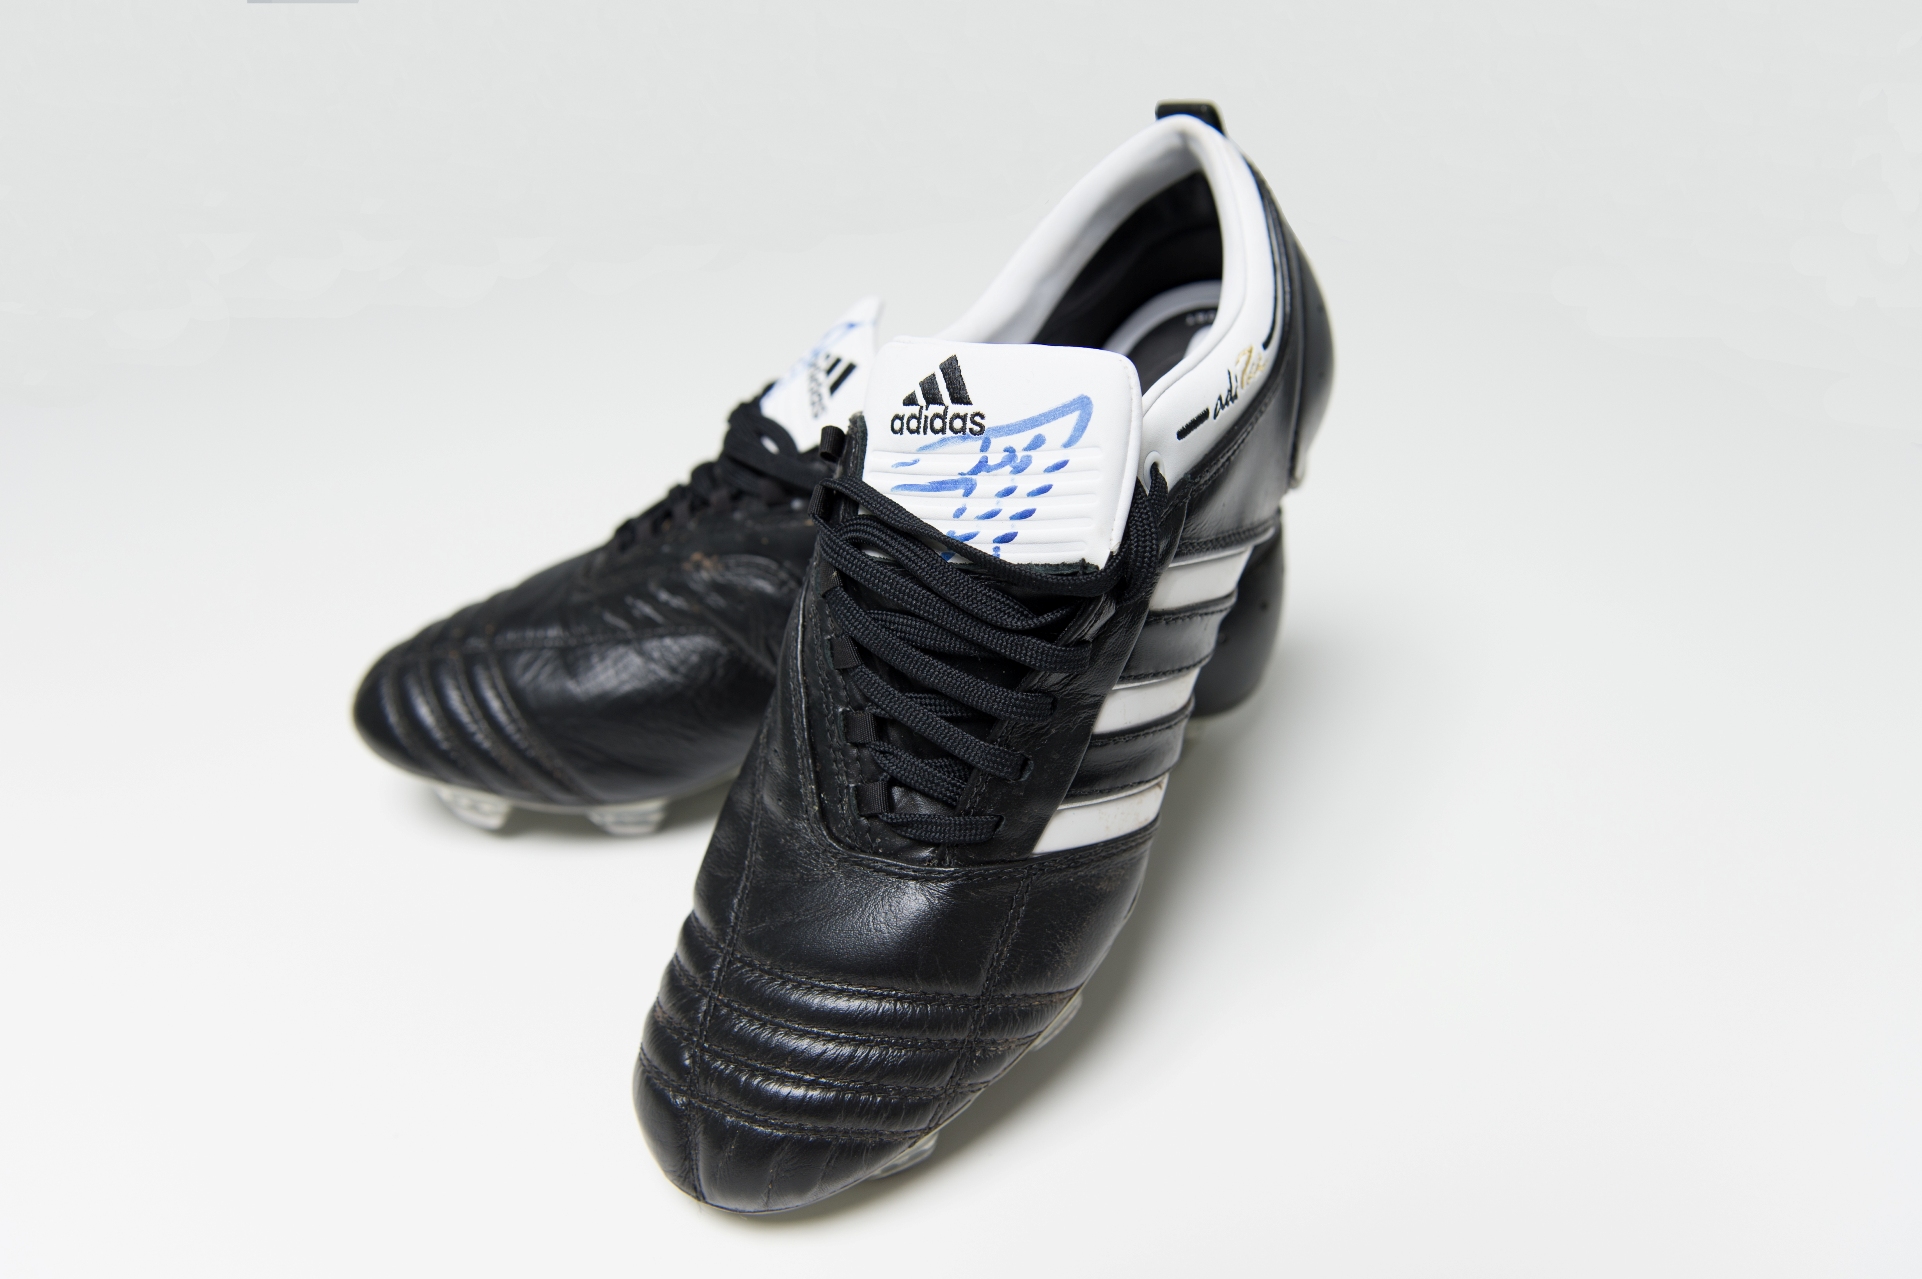 Donated by UEFA. FC Bayern Munich  signed boots.  This highly collectable pair of AdiPure boots